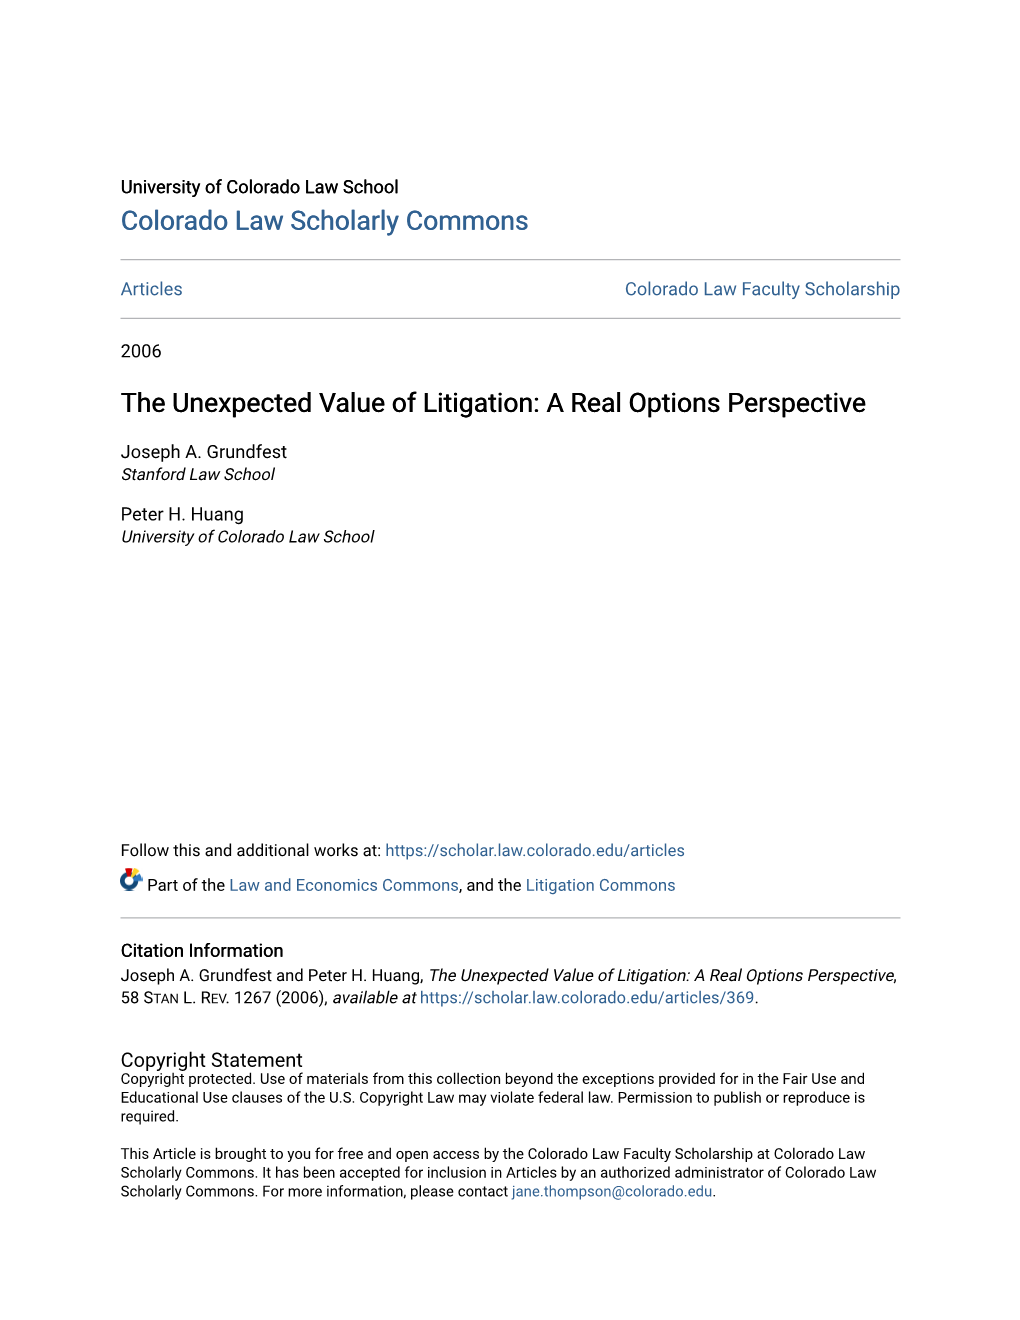 The Unexpected Value of Litigation: a Real Options Perspective